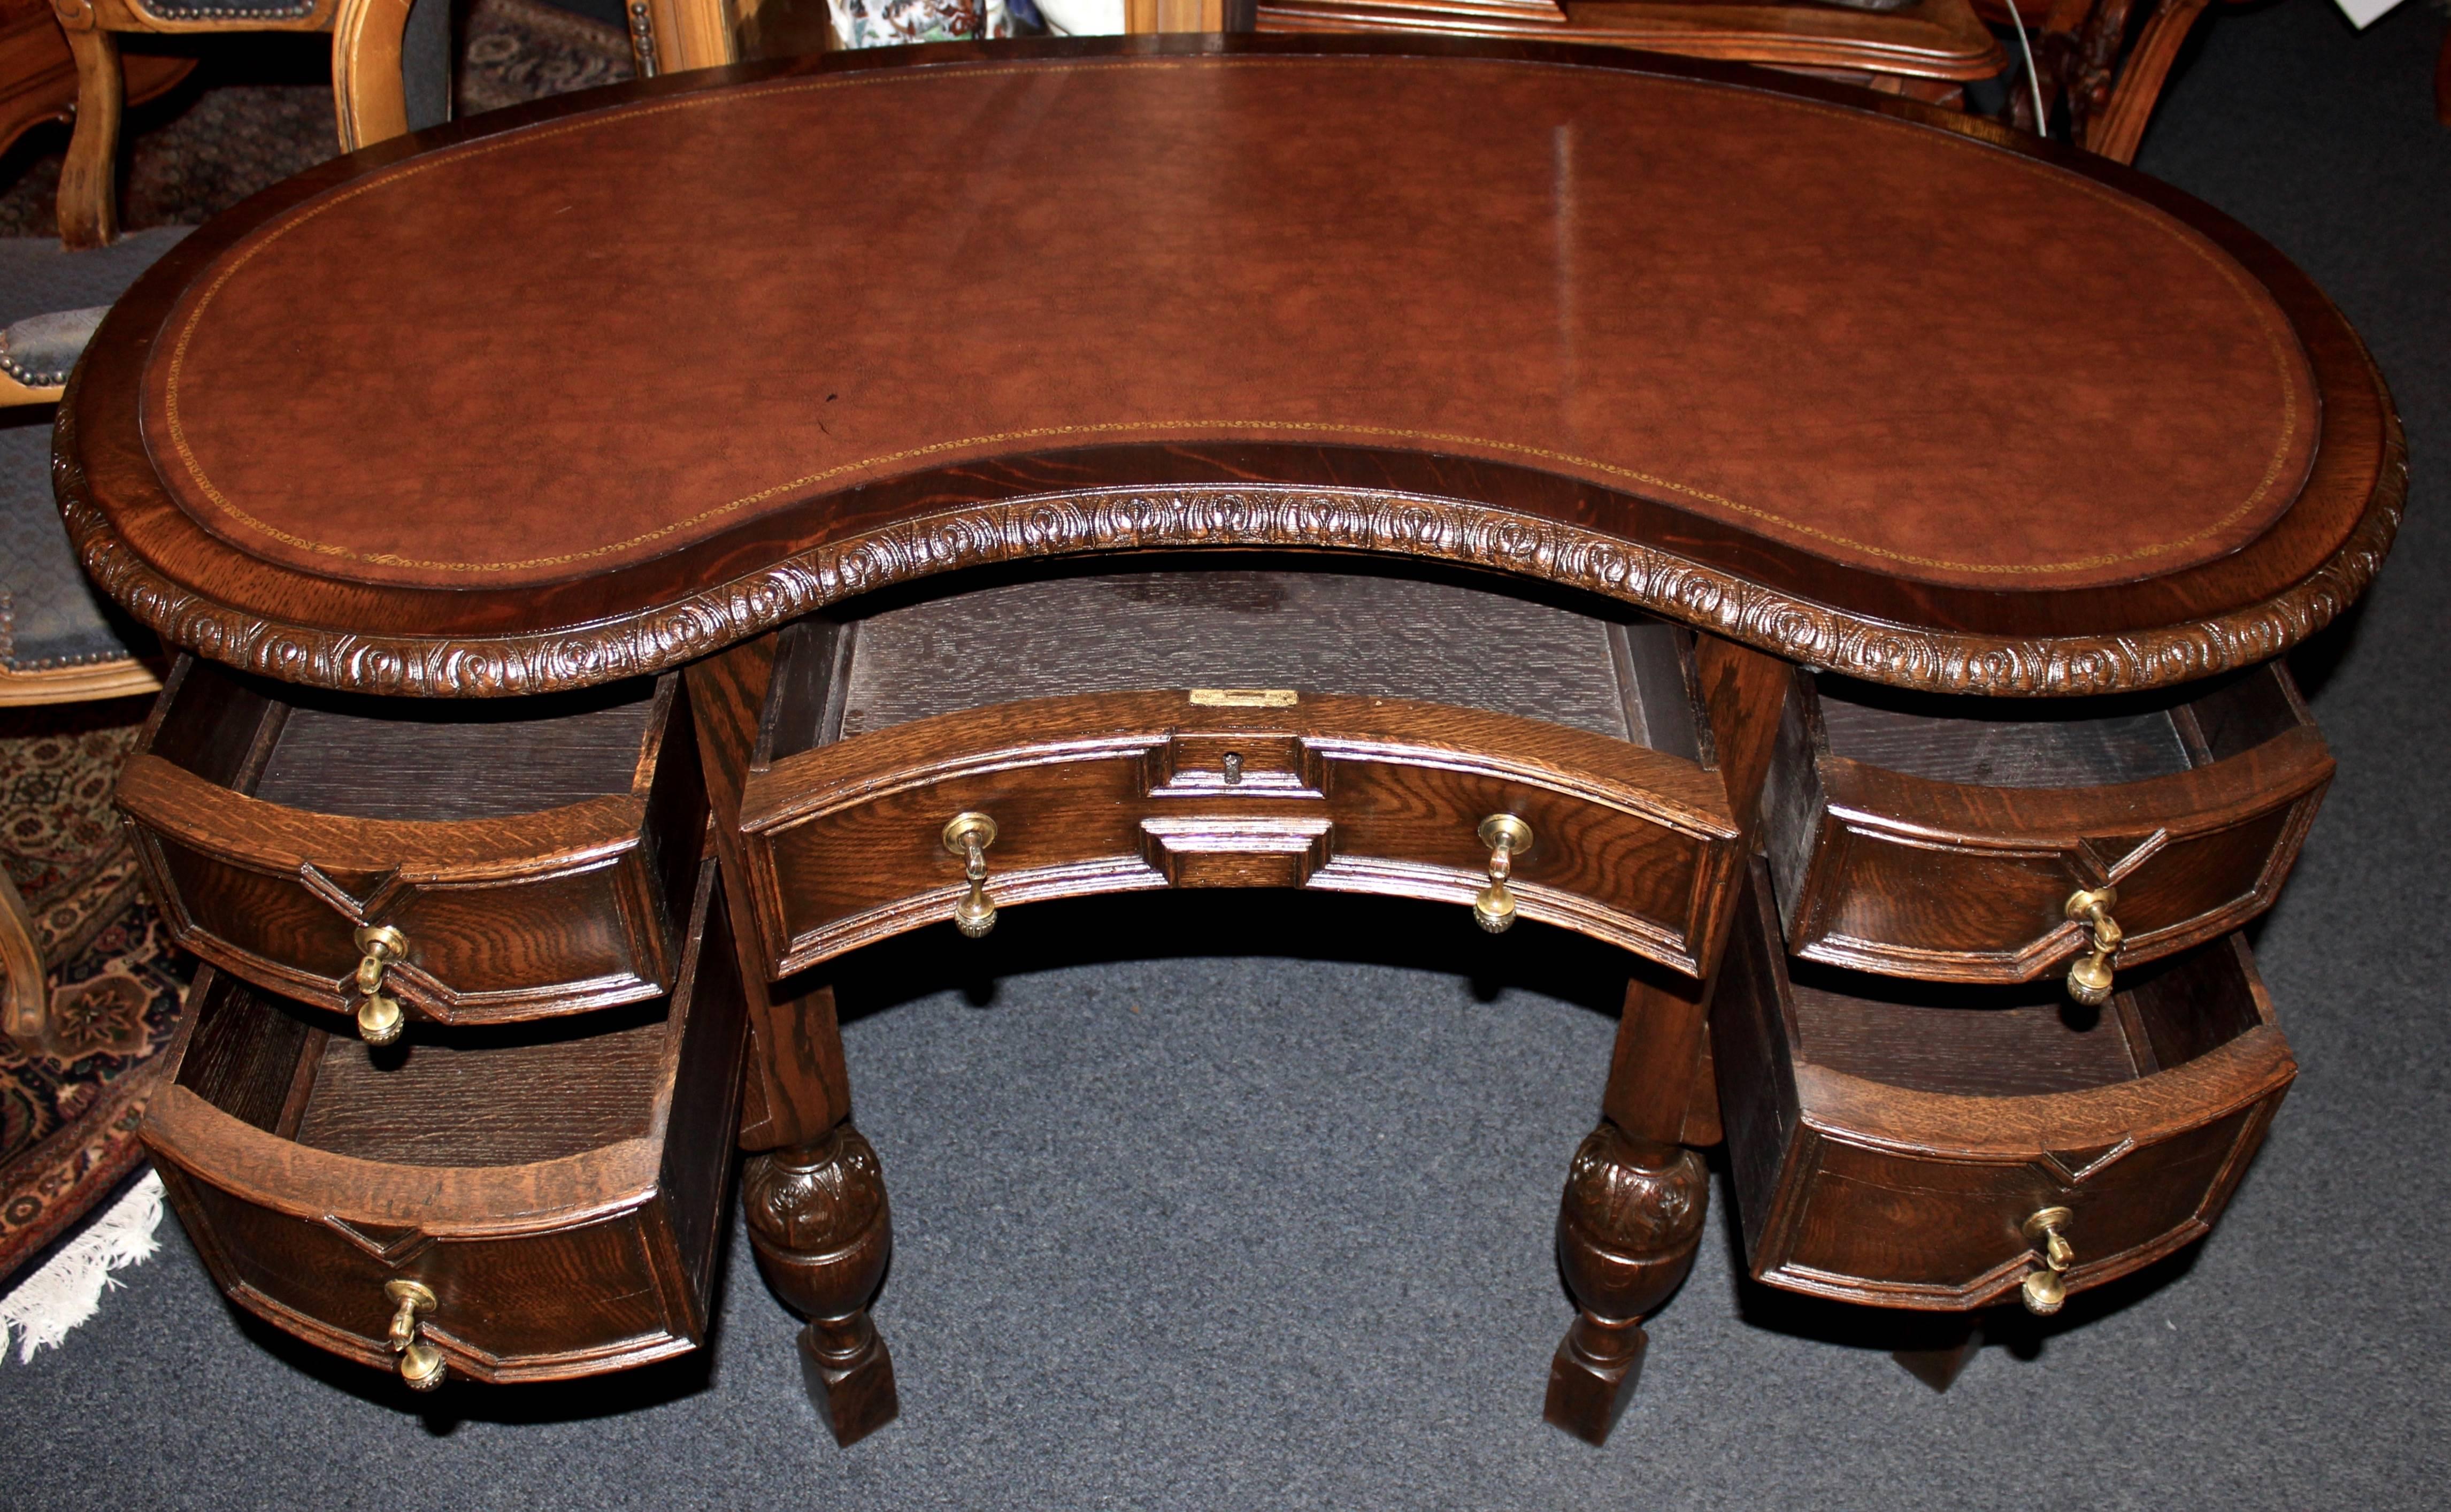 This English oak desk is made in a kidney shape in the straight-lined, Jacobean style.  It features carvings that are indicative of the minimalistic style as well as an embossed leather top.  Storage includes 5 pull-out drawers.  